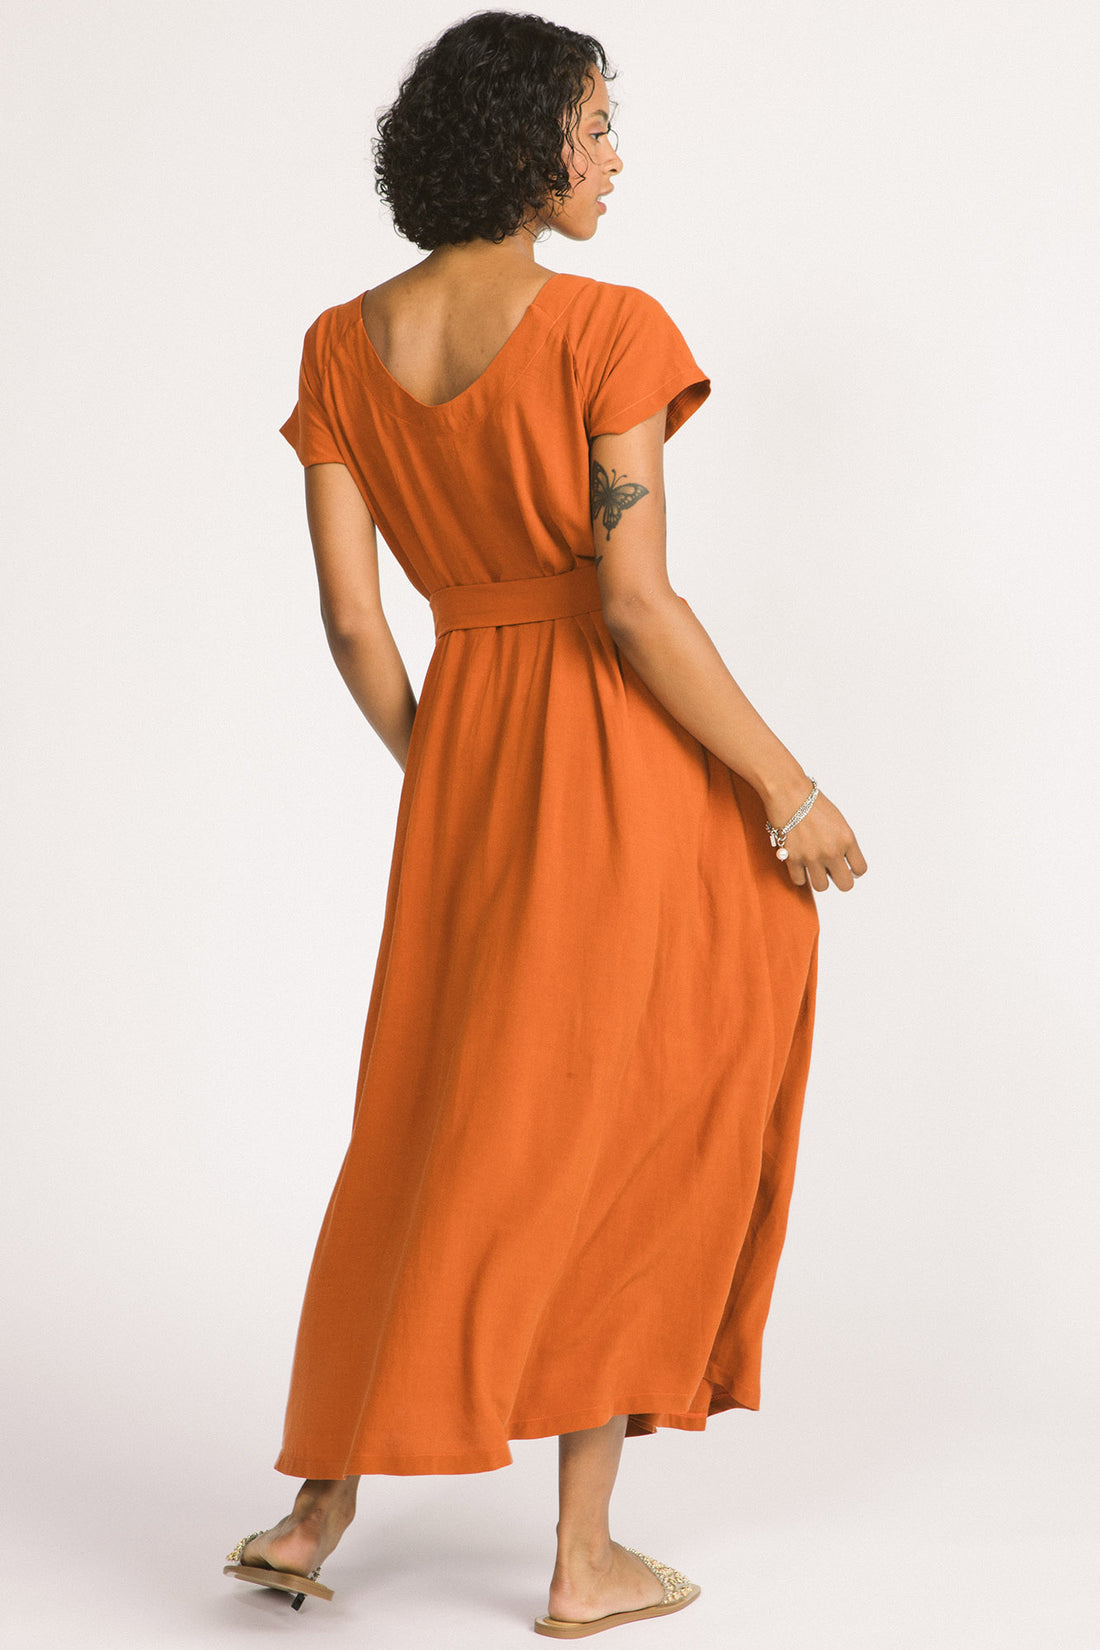 Enola Dress by Allison Wonderland, Rust, back view, voluminous maxi dress, scoop neck front and back, short raglan sleeves, front horizontal seam with gathers below the natural waist, pockets, matching belt, eco-fabric, viscose, linen, sizes 2-12, made in Vancouver